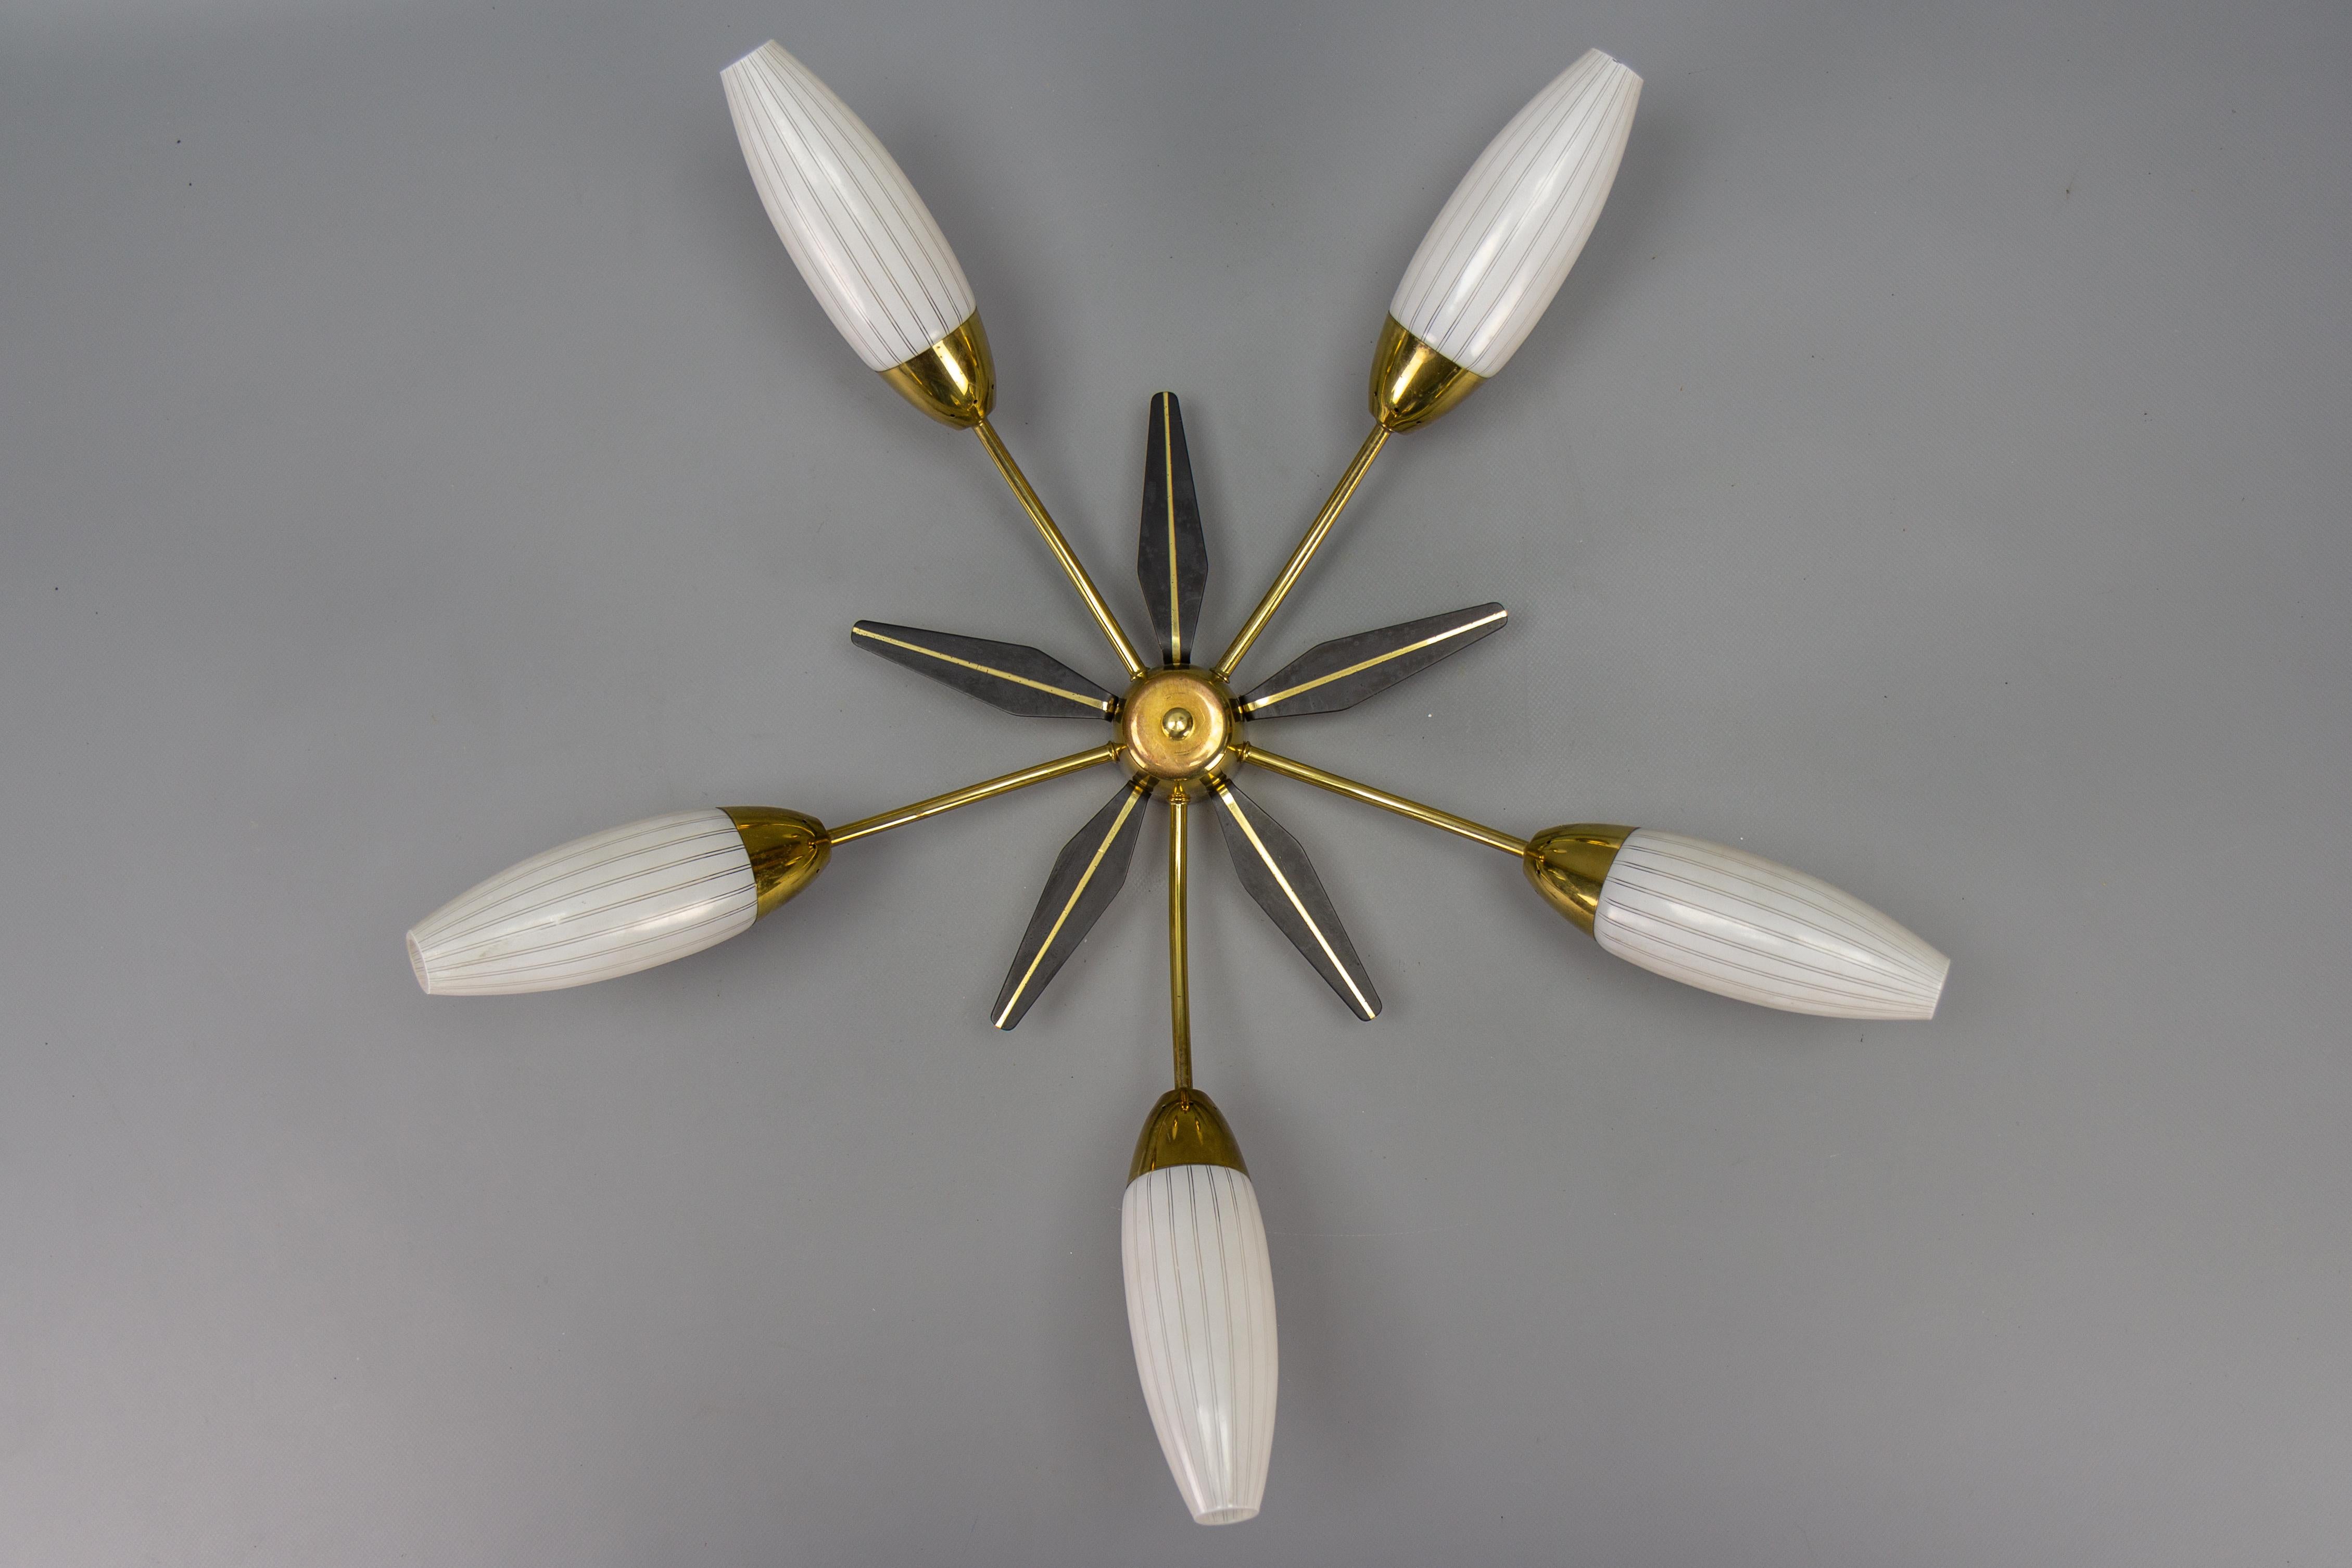 Mid-Century Modern brass and white glass five-light Sputnik flush mount, Italy, circa the 1950s.
This adorable vintage Sputnik-era flush mount features a brass frame with five arms, each with a white-colored glass lampshade, the center of the flush